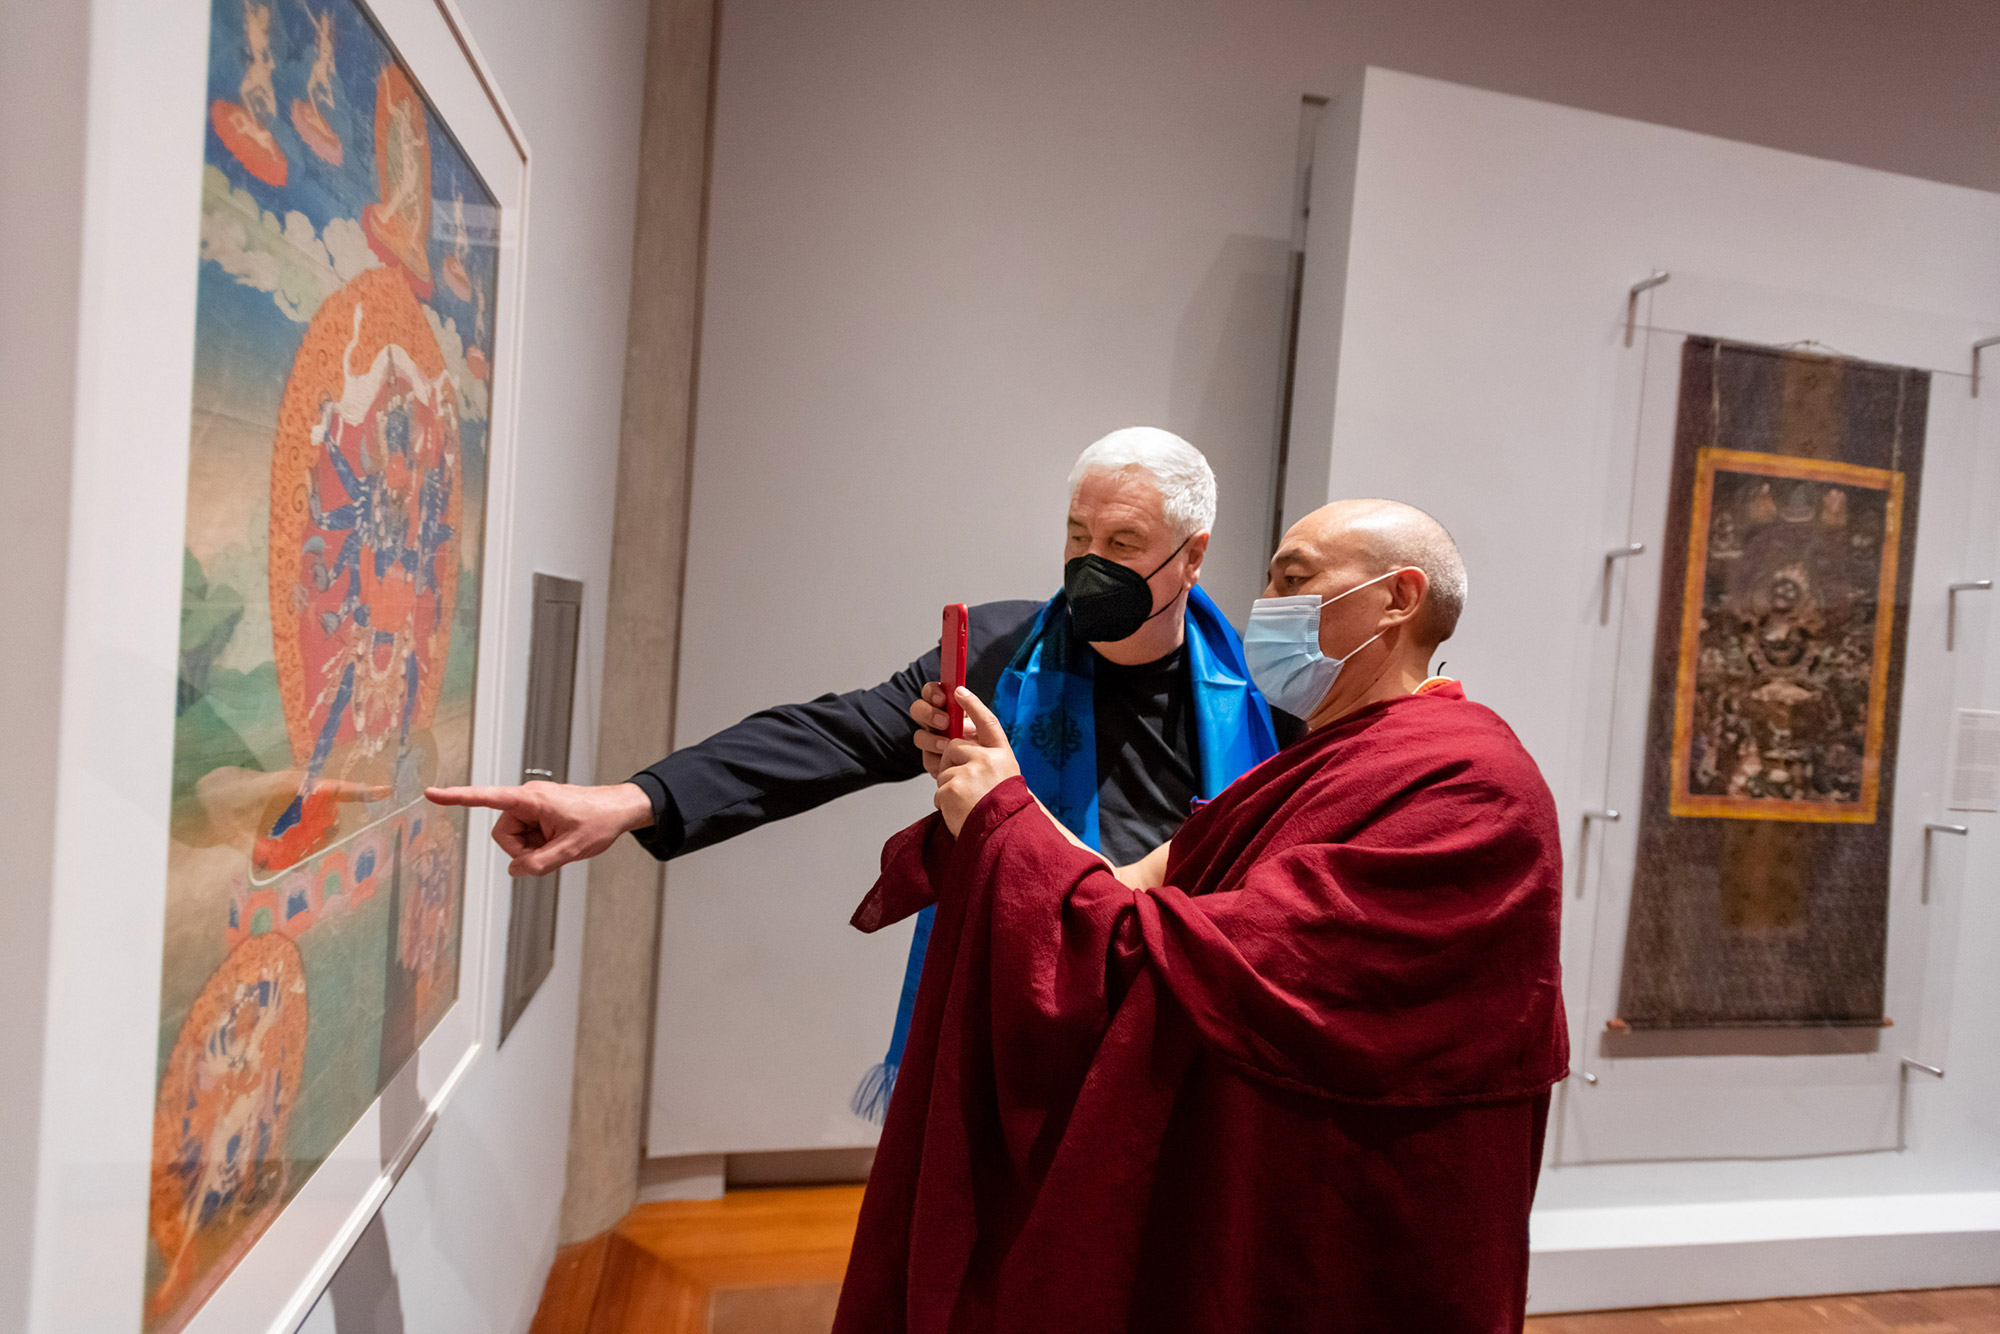 Jack Shear (left), donor of the exhibit, discusses the intricate artwork of a Thangka, a religious painting on cloth, with Lama Topgyal.